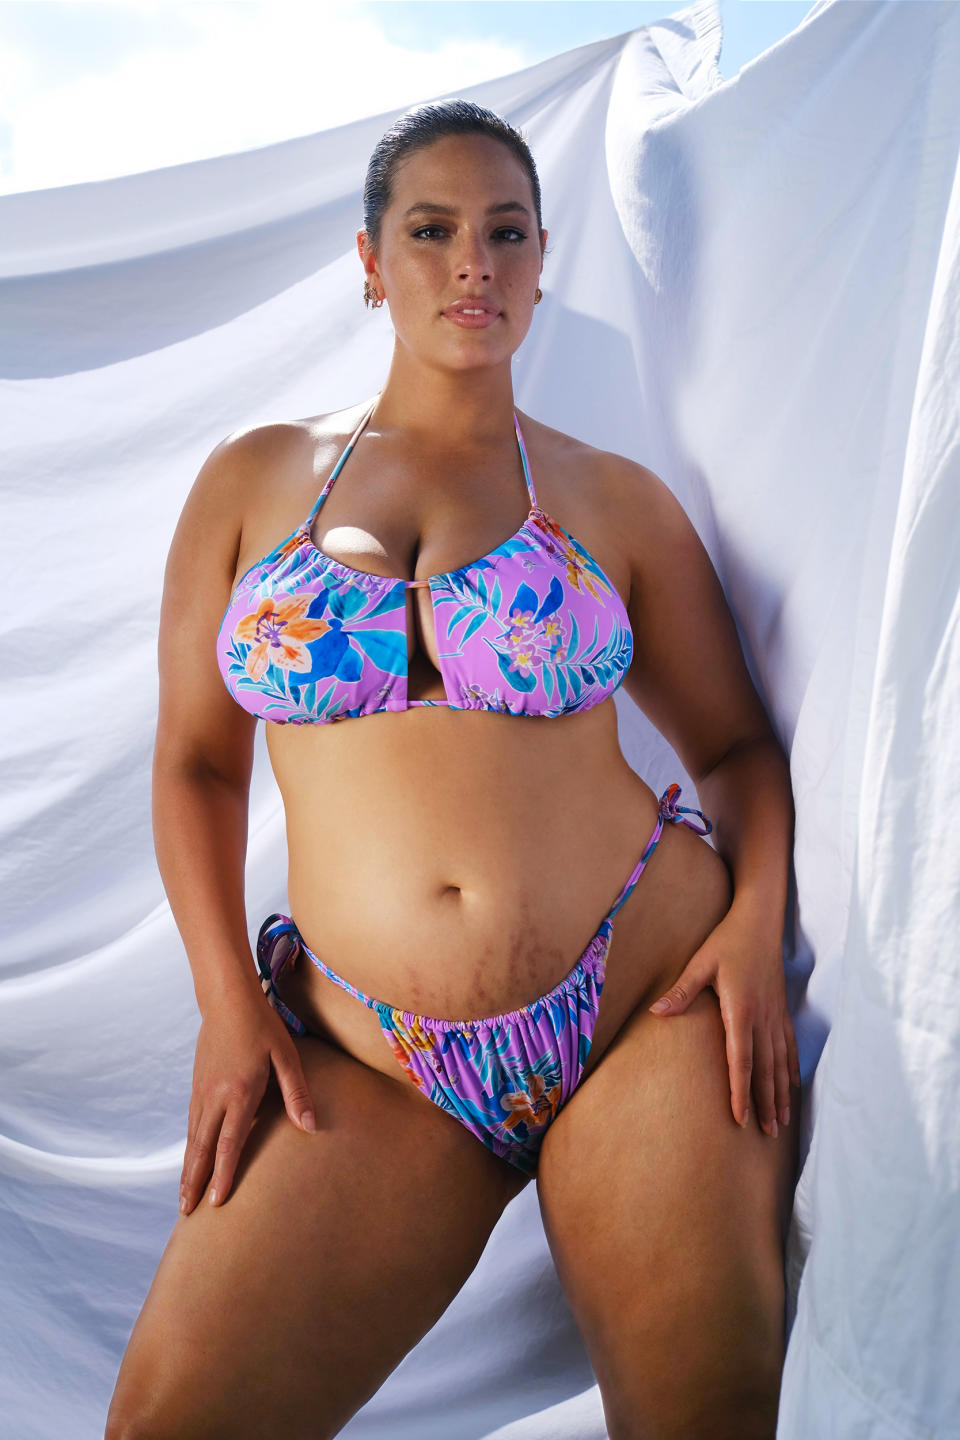 Ashley Graham shows off stretch marks in new photo shoot (Justin Ervin / Swimsuits for All)